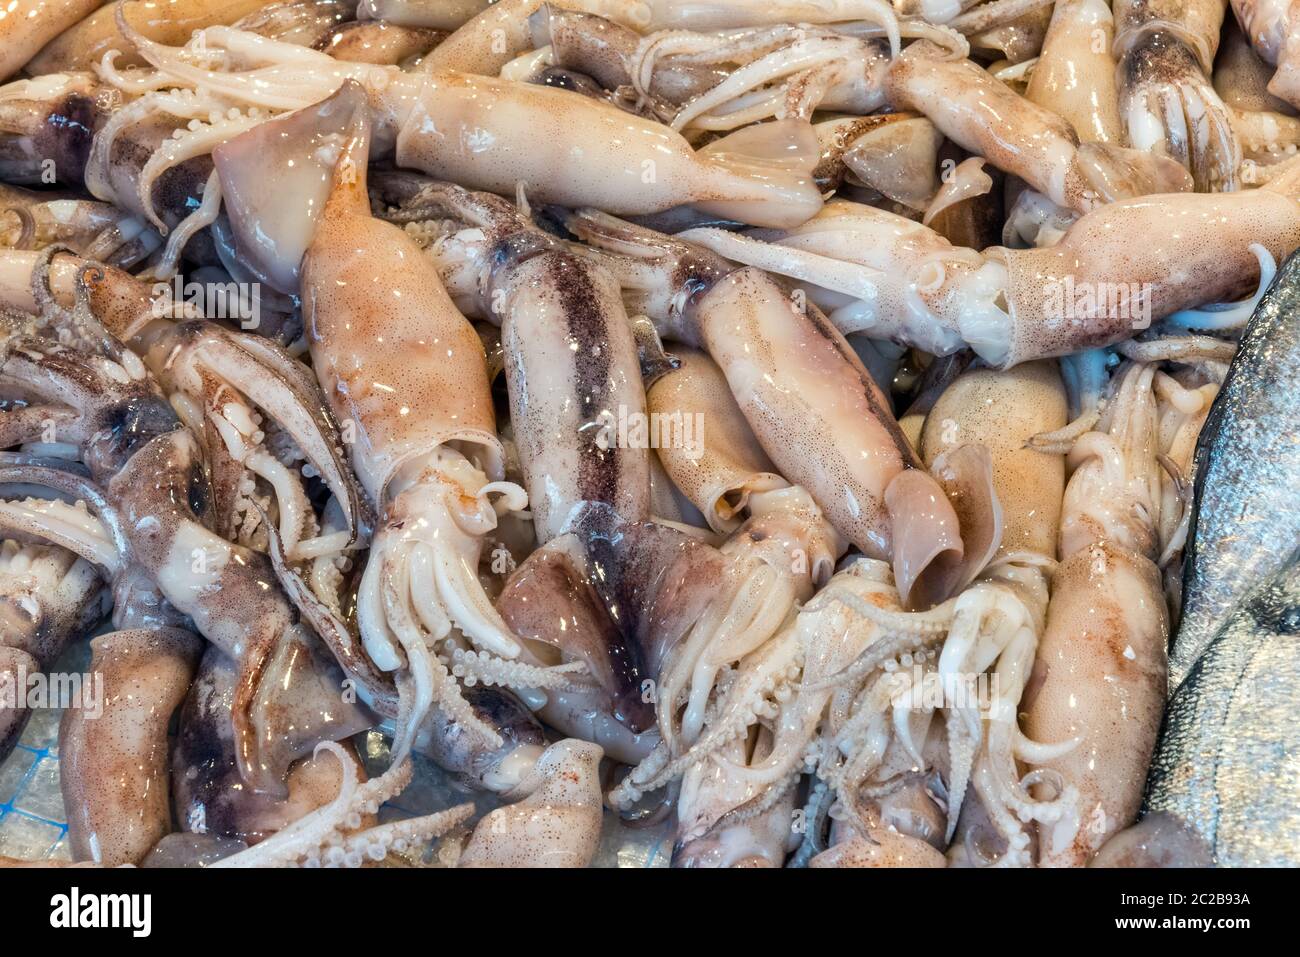 Squid for sale at a market in Palermo, Sicily Stock Photo